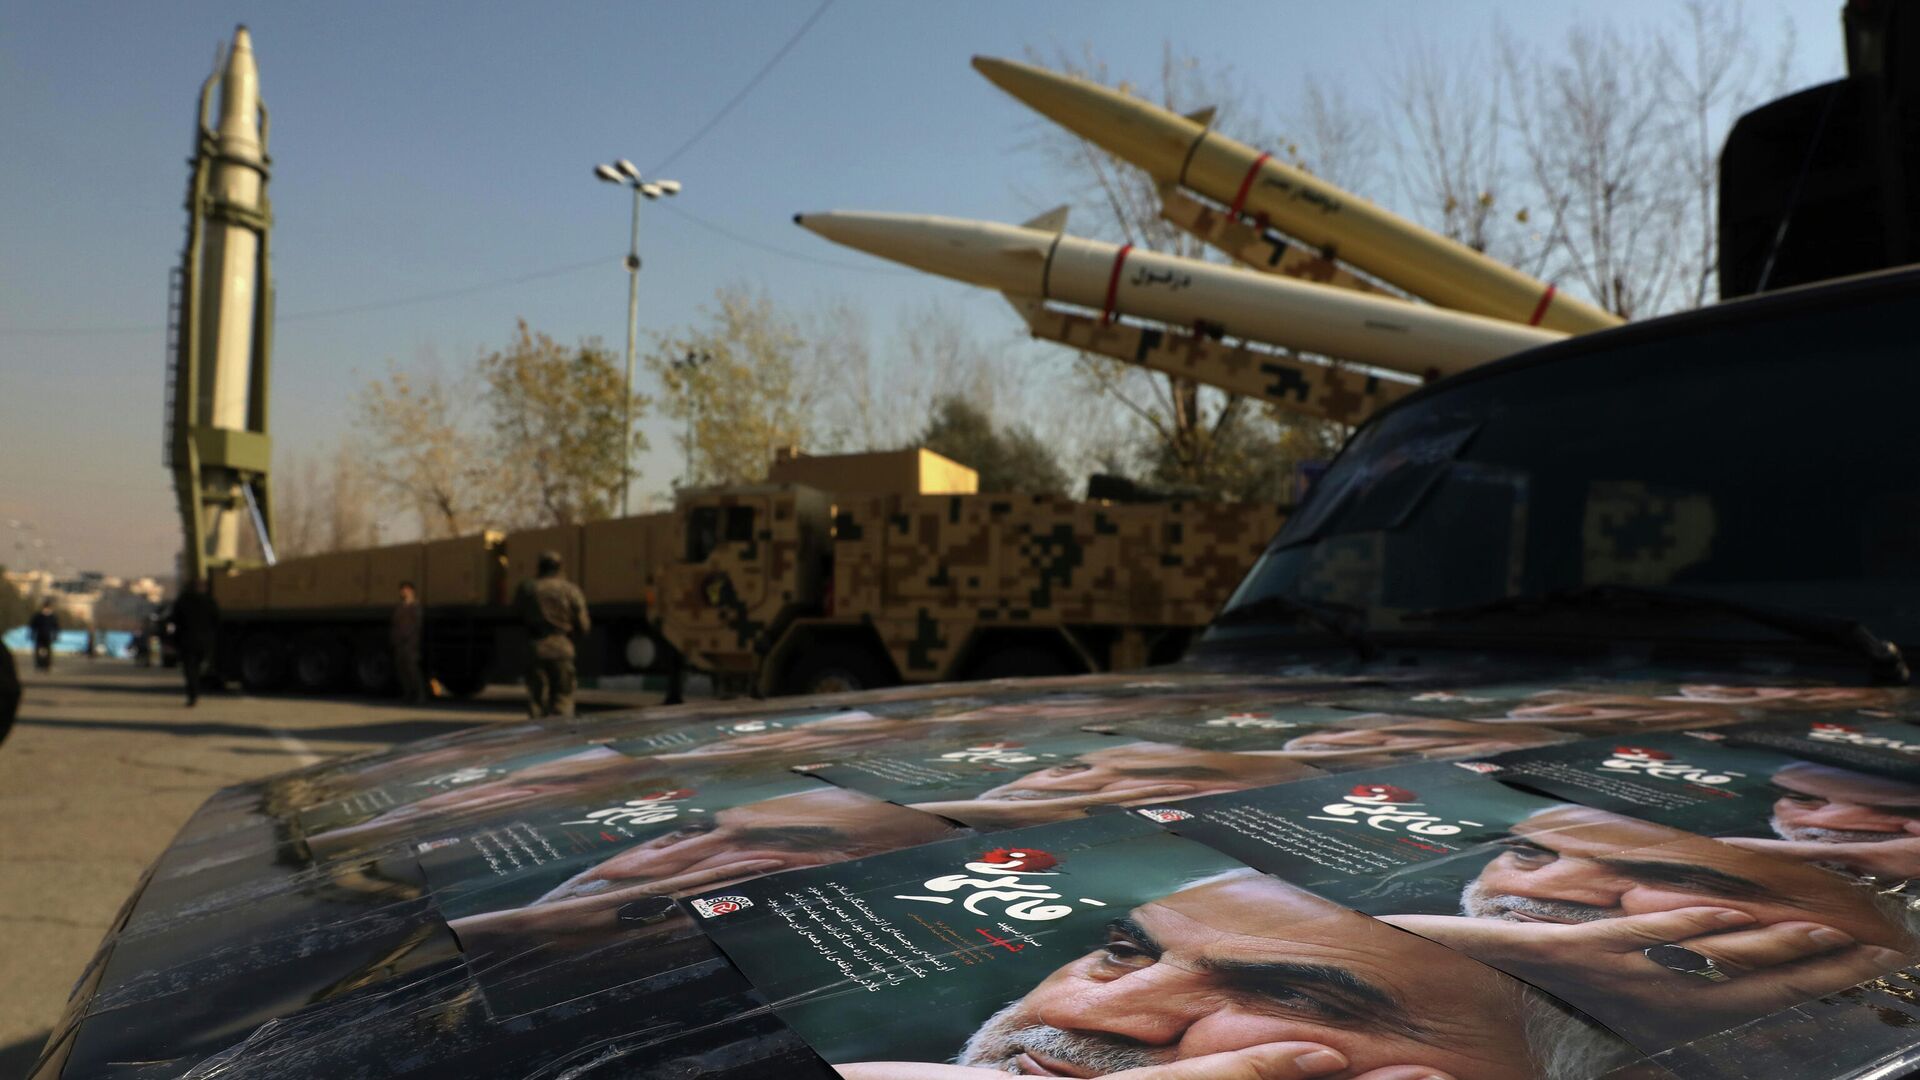 Posters of Iranian Gen. Qassem Soleimani, who was killed in Iraq in a U.S. drone attack in Jan. 3, 2020, are seen in front of Qiam, background left, Zolfaghar, top right, and Dezful missiles displayed in a missile capabilities exhibition by the paramilitary Revolutionary Guard a day prior to second anniversary of Iran's missile strike on U.S. bases in Iraq in retaliation for killing Gen. Soleimani, at Imam Khomeini grand mosque, in Tehran, Iran, Friday, Jan. 7, 2022. Iran put three ballistic missiles on display on Friday, as talks in Vienna aimed at reviving Tehran's nuclear deal with world powers flounder. (AP Photo/Vahid Salemi) - Sputnik International, 1920, 09.02.2022